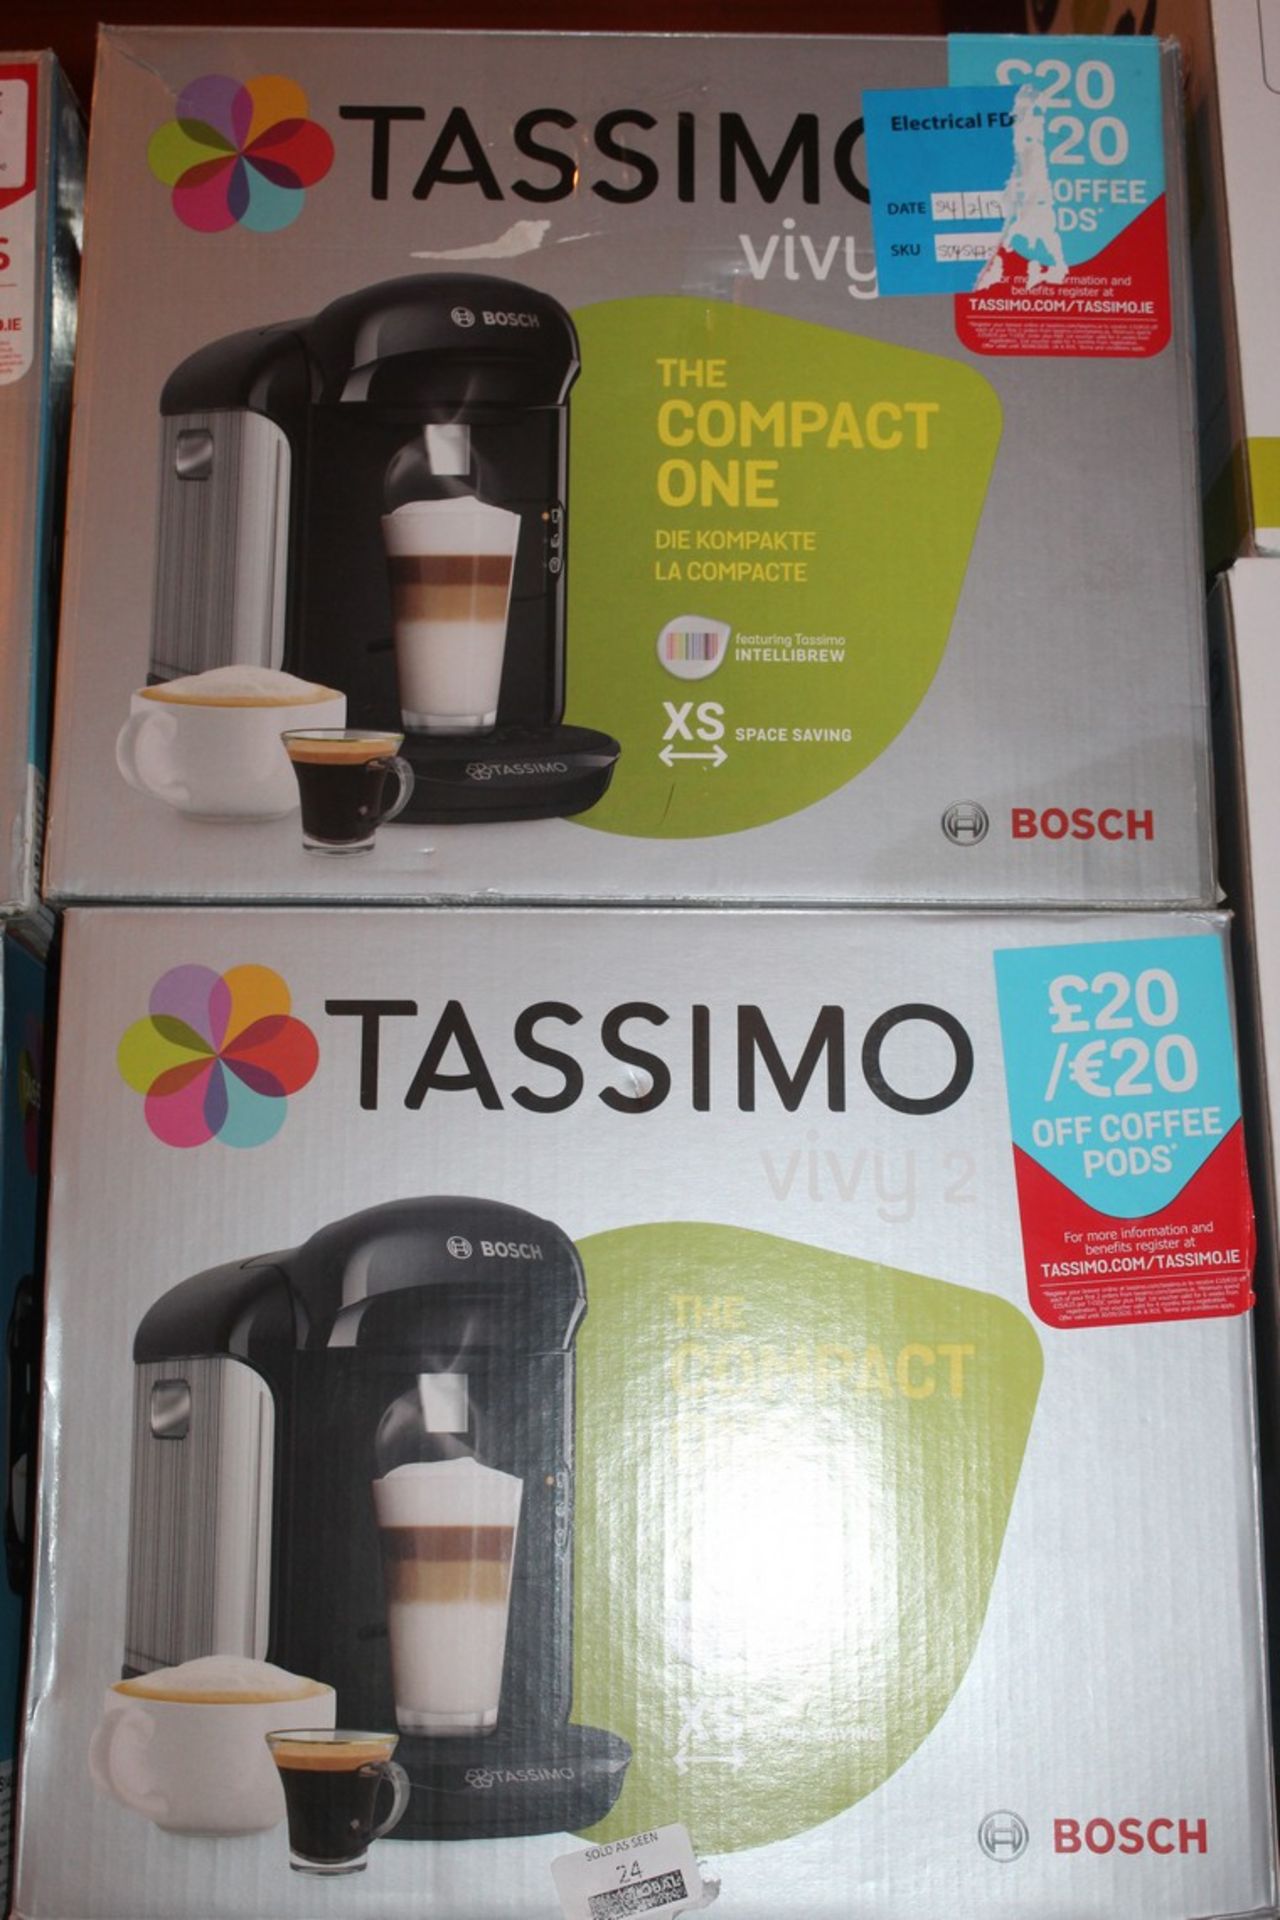 Lot to Contain 2 Boxed Bosch Tassimo Viv2 Coffee Makers RRP £200 (Untested Customer Returns)